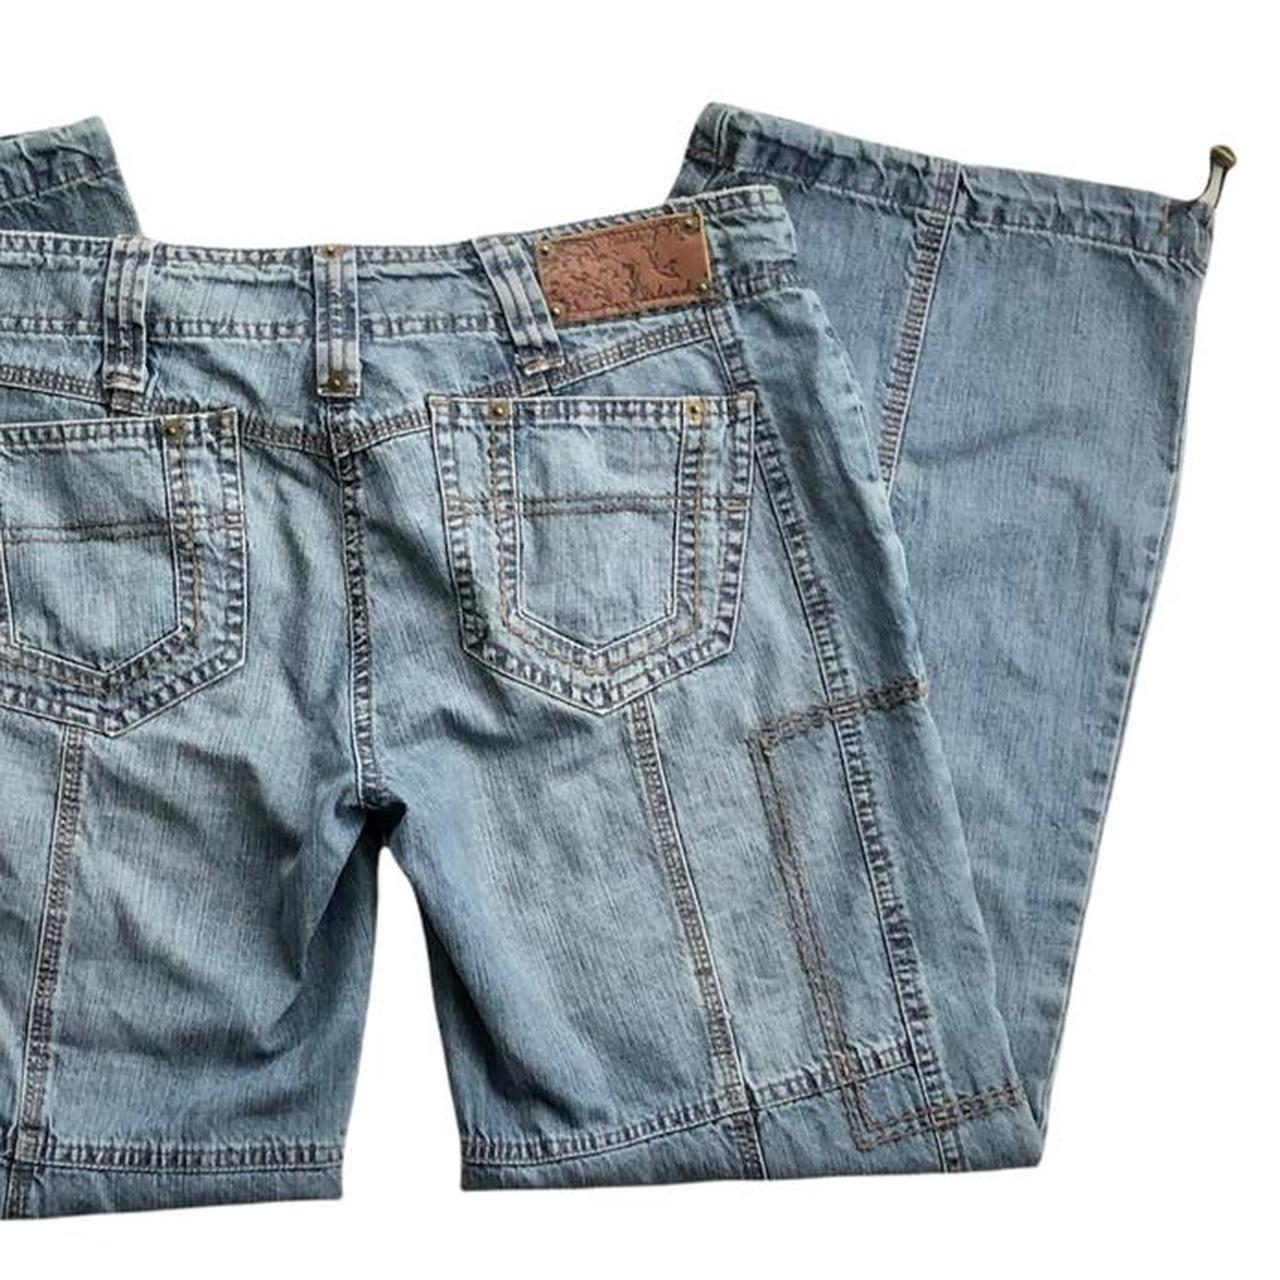 Product Image 3 - Y2k jeans, cargo style low